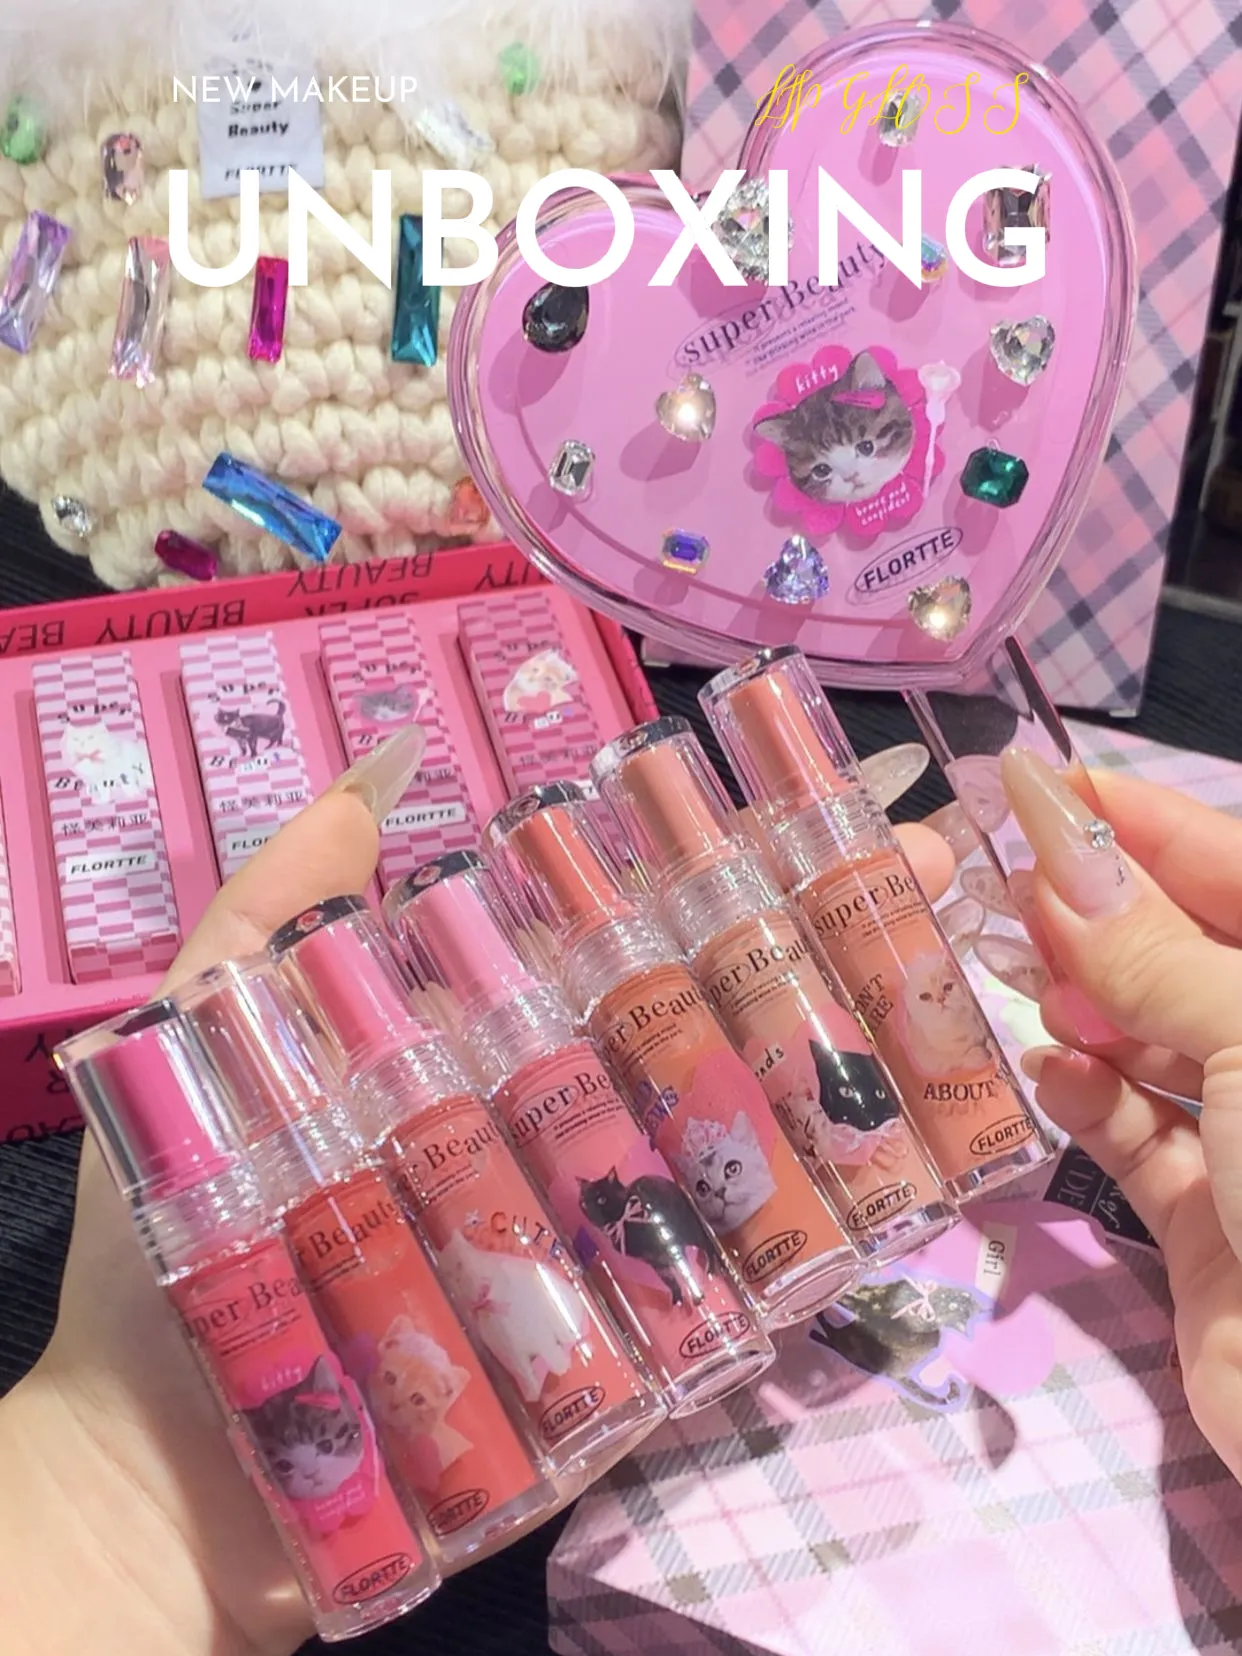 New Cat Lipgloss Unboxing 🤗😻, Article posted by Super_Loopy